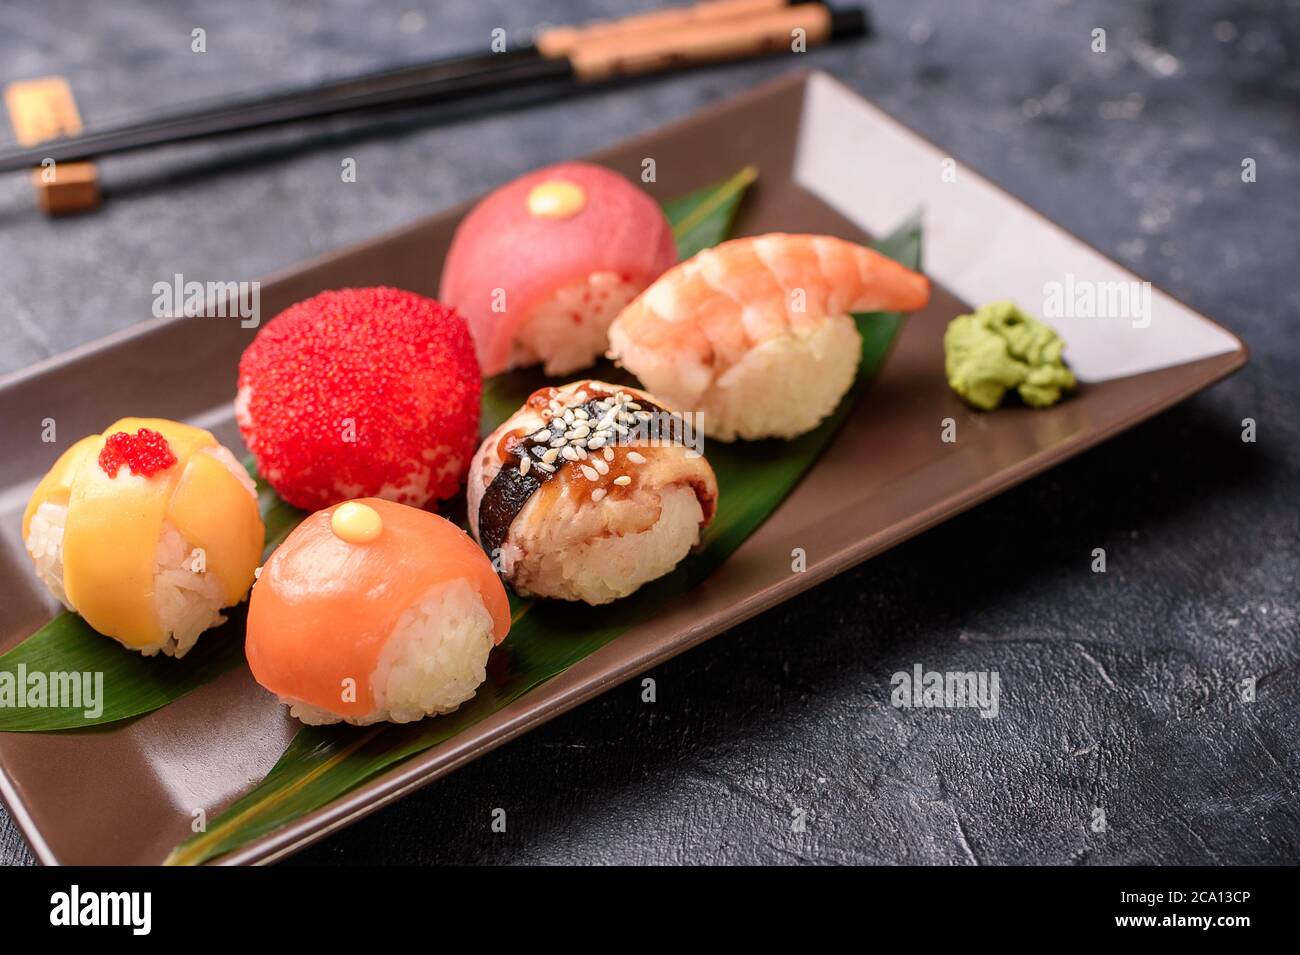 Sushi rolls made of rice, smoked eel, cream cheese and flying fish roeSet hot rolls with avacado, salmon, cream cheese, seaweed, soy sauce, ginger on Stock Photo